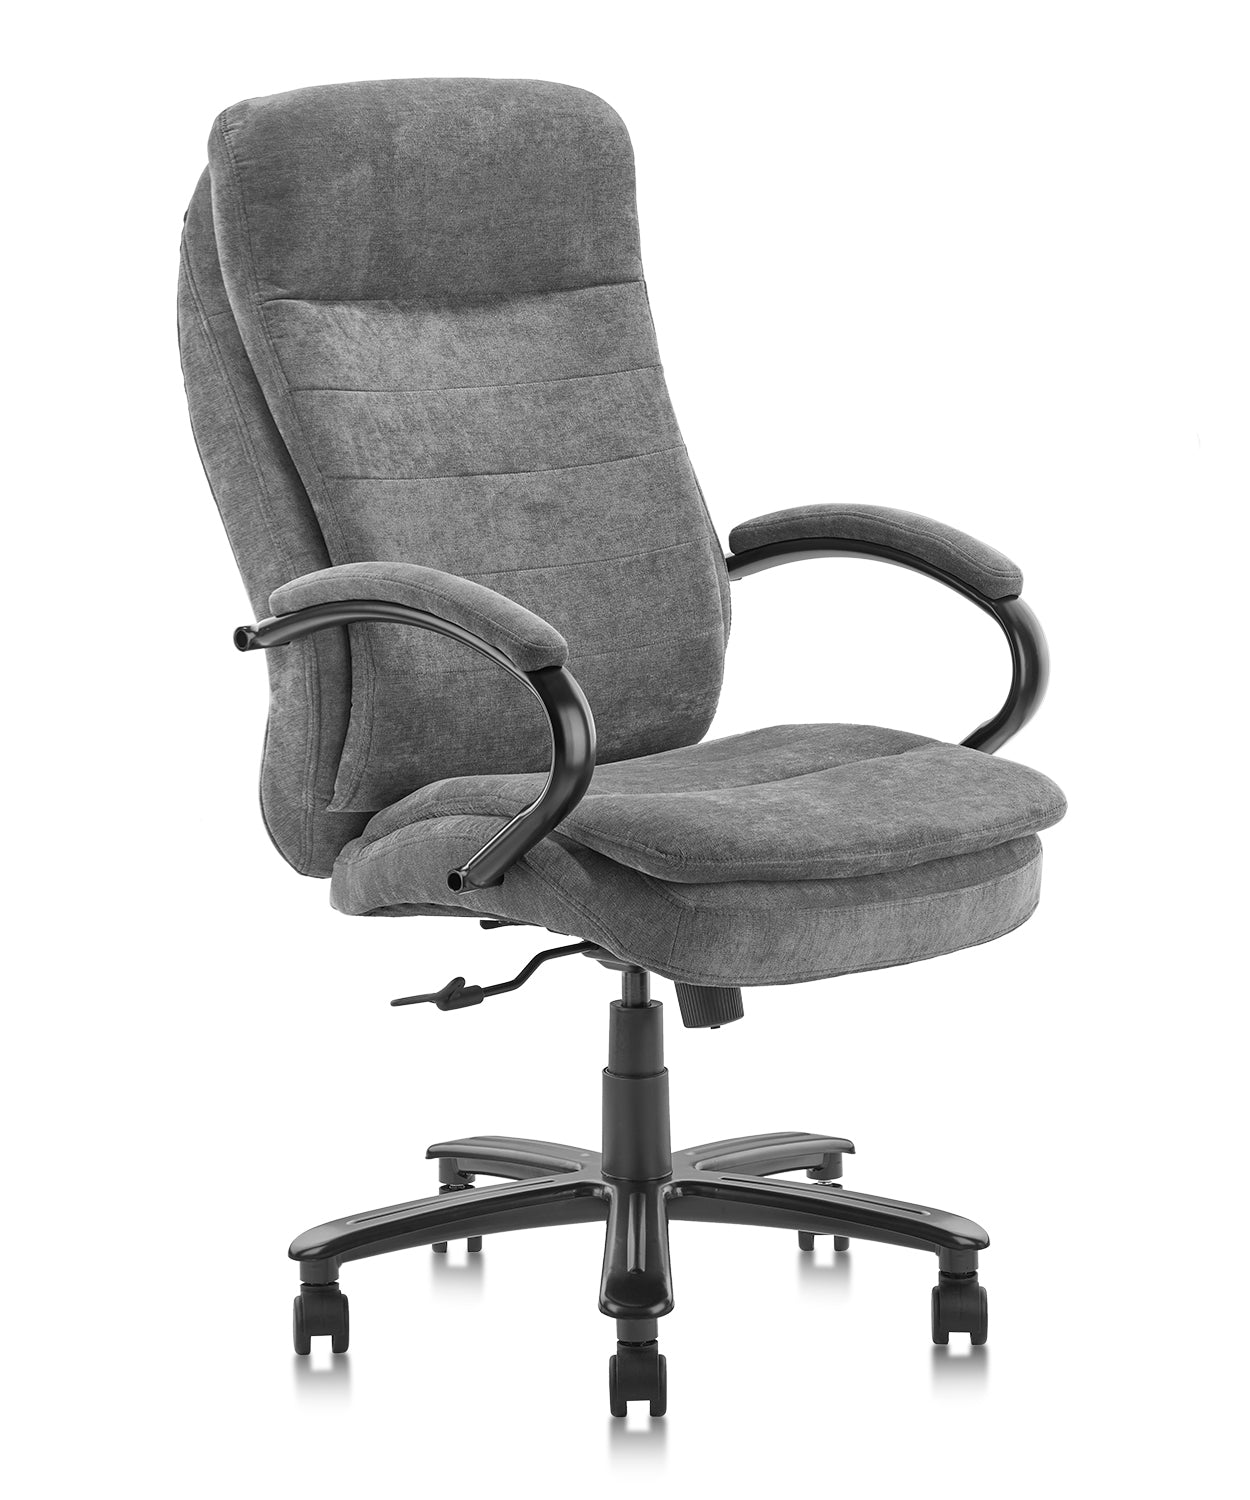 CLATINA Ergonomic Big & Tall Executive Office Chair with Fabric Upholstery 400lbs High Capacity Swivel Adjustable Height Thick Padding Headrest and Armrest for Home Office Gray 1 Pack